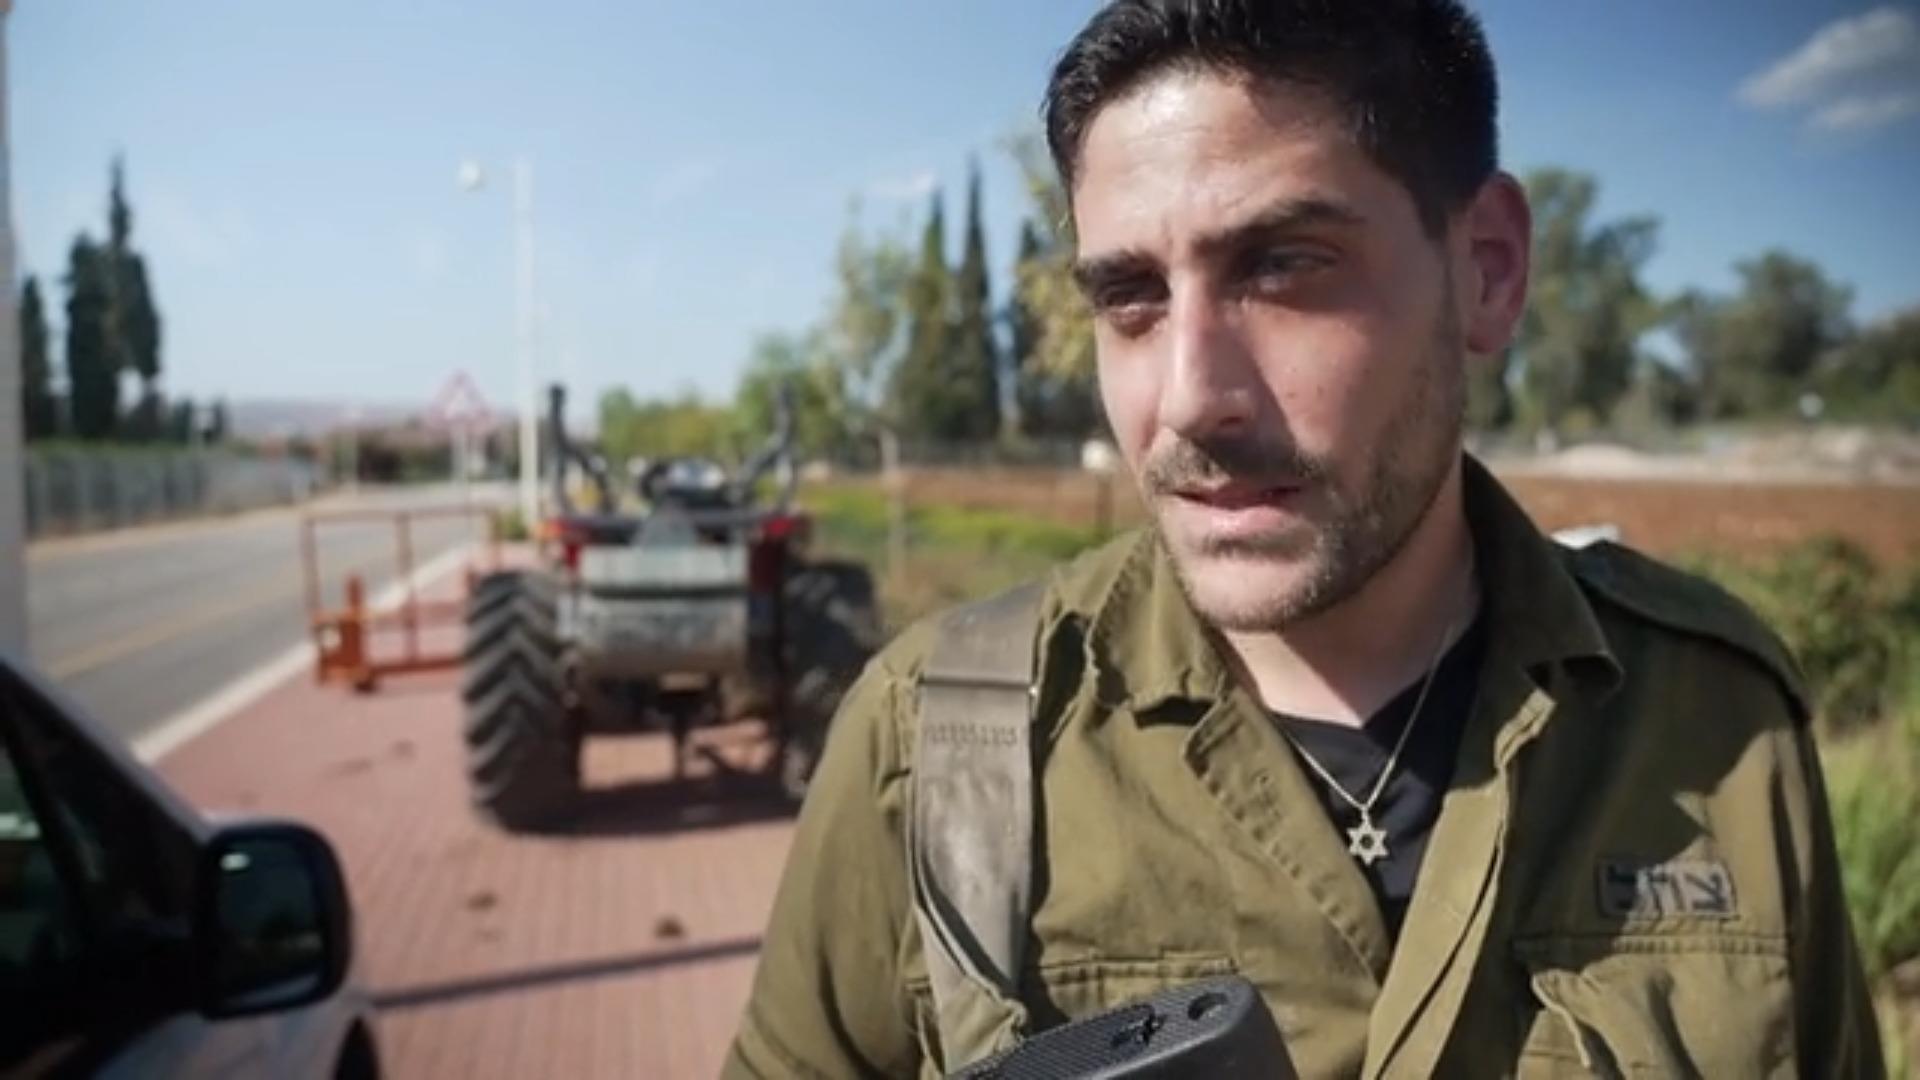 "You are scared, but now you have to be strong" Reservist Alon grew up in Germany